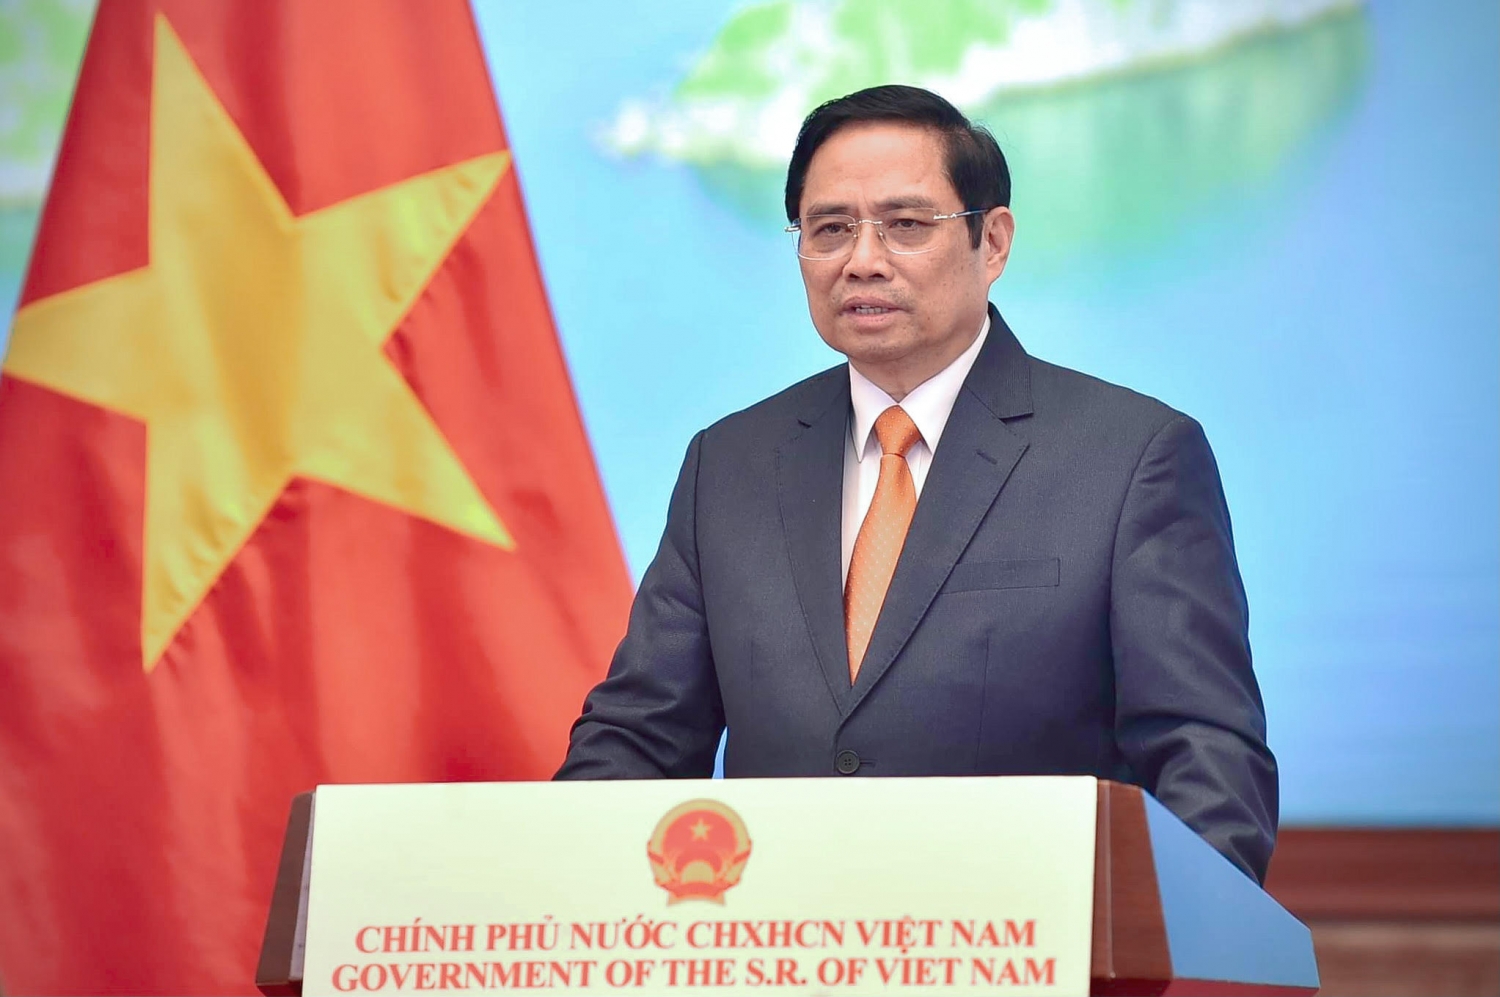 Remarks by his excellency Pham Minh Chinh Prime Minister of the socialist republic of Viet Nam at the 7th Greater Mekong Subregion Summit